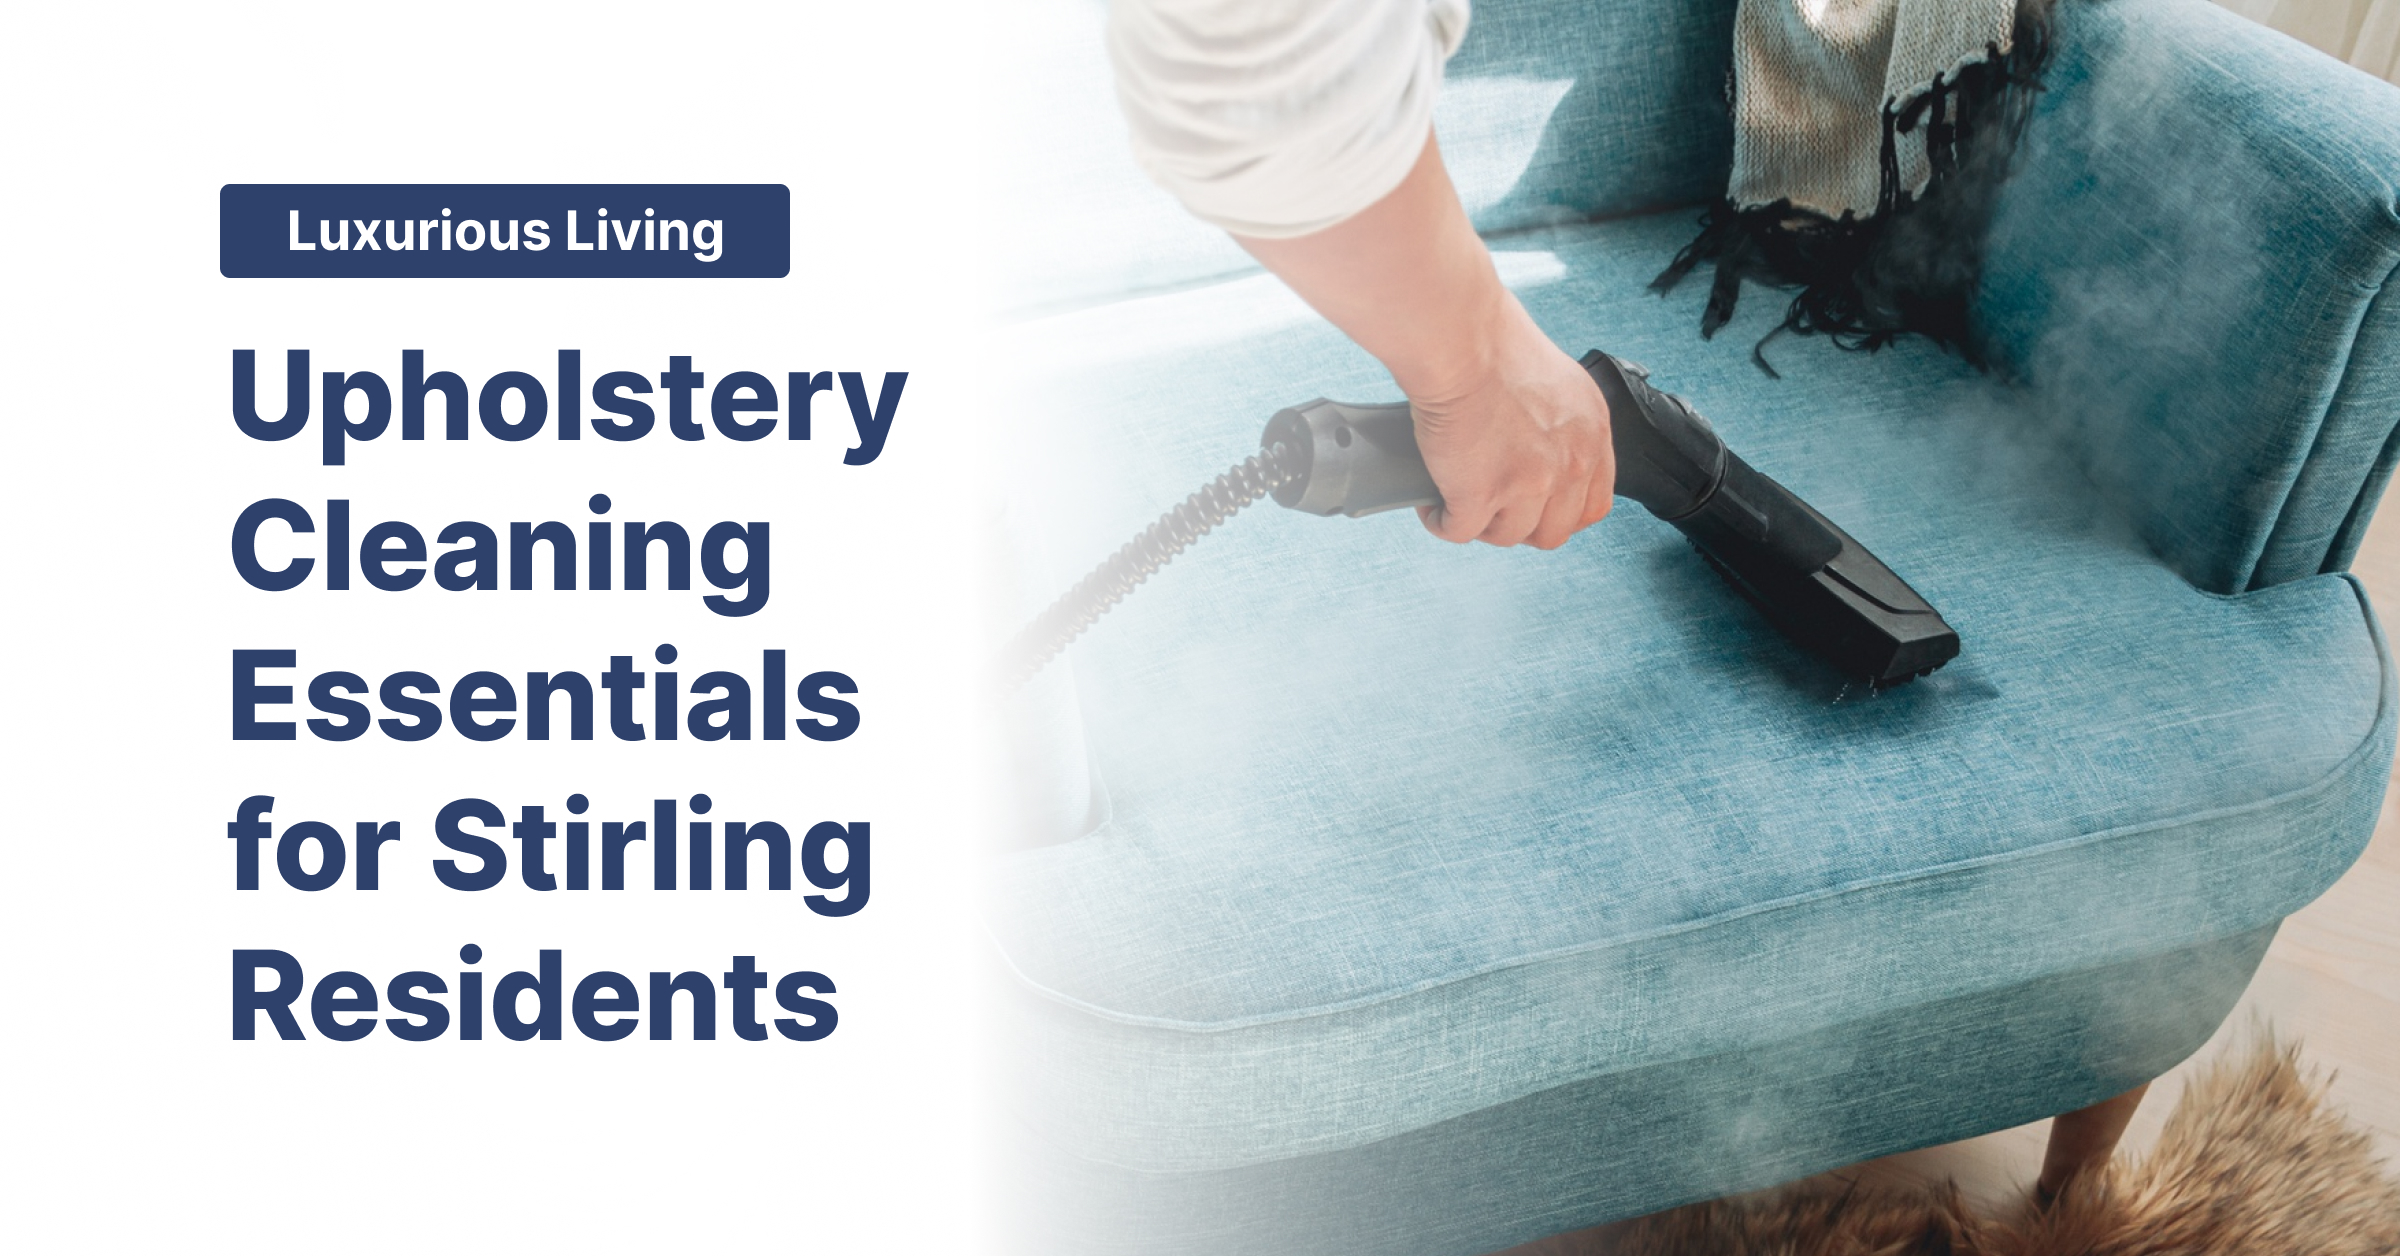 Upholstery Cleaning in Stirling